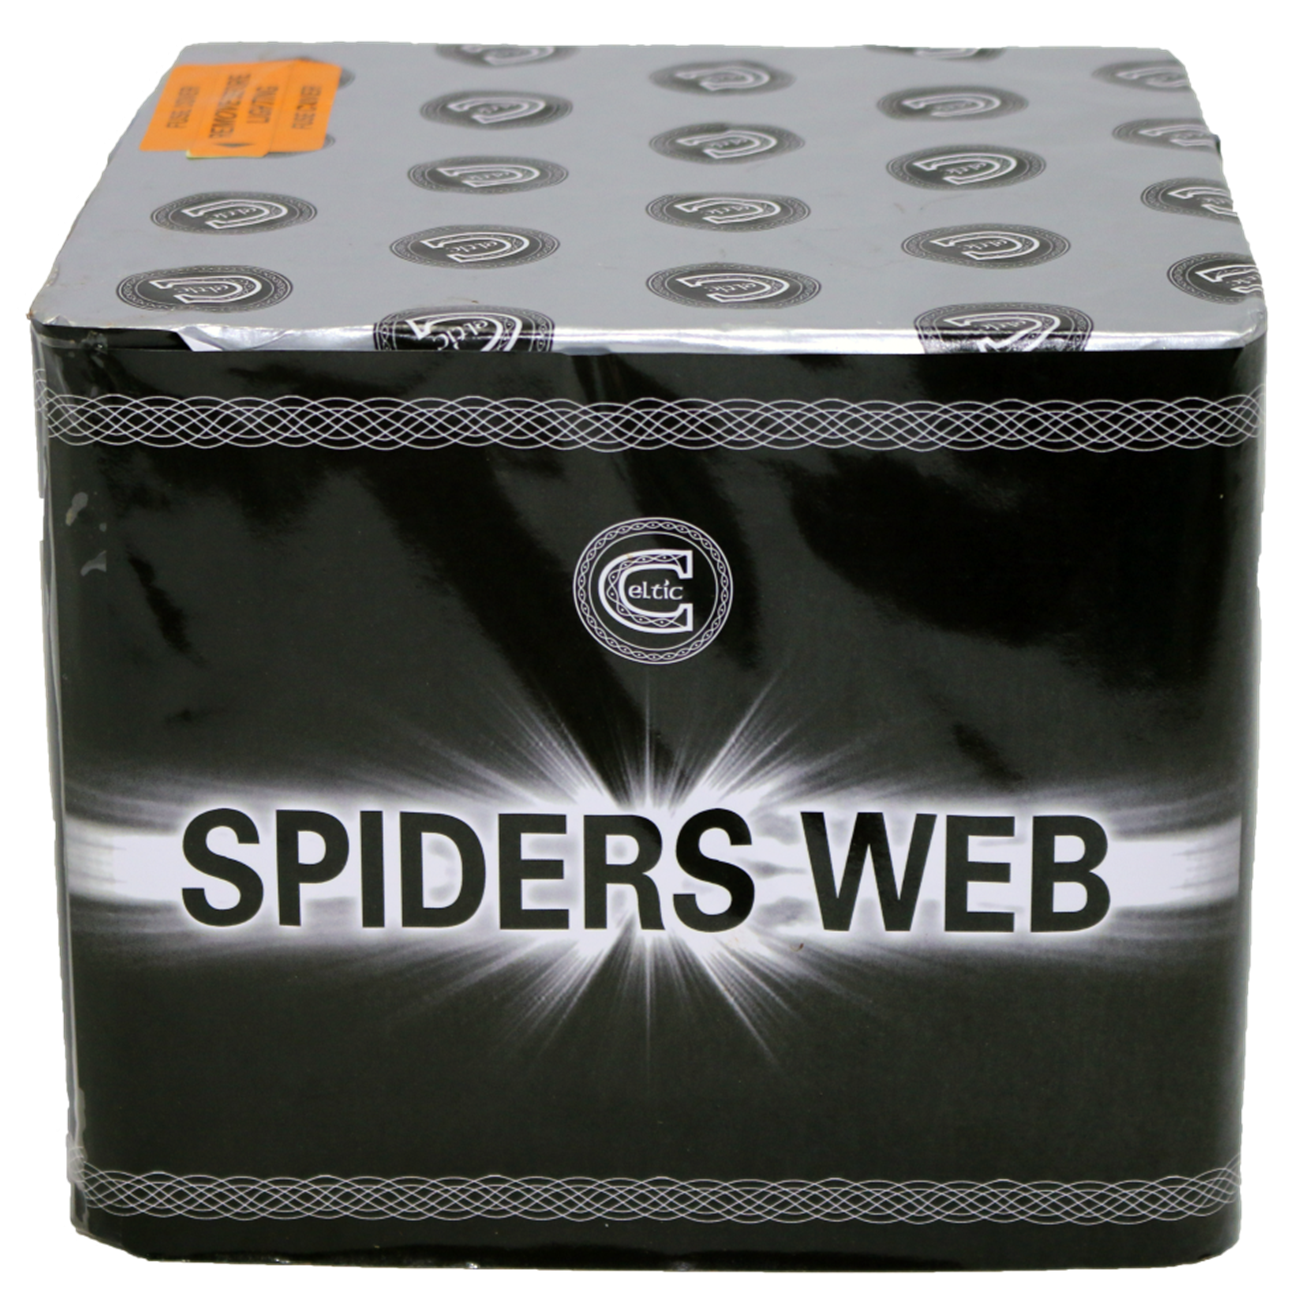 Spiders Web by Celtic Fireworks Front View